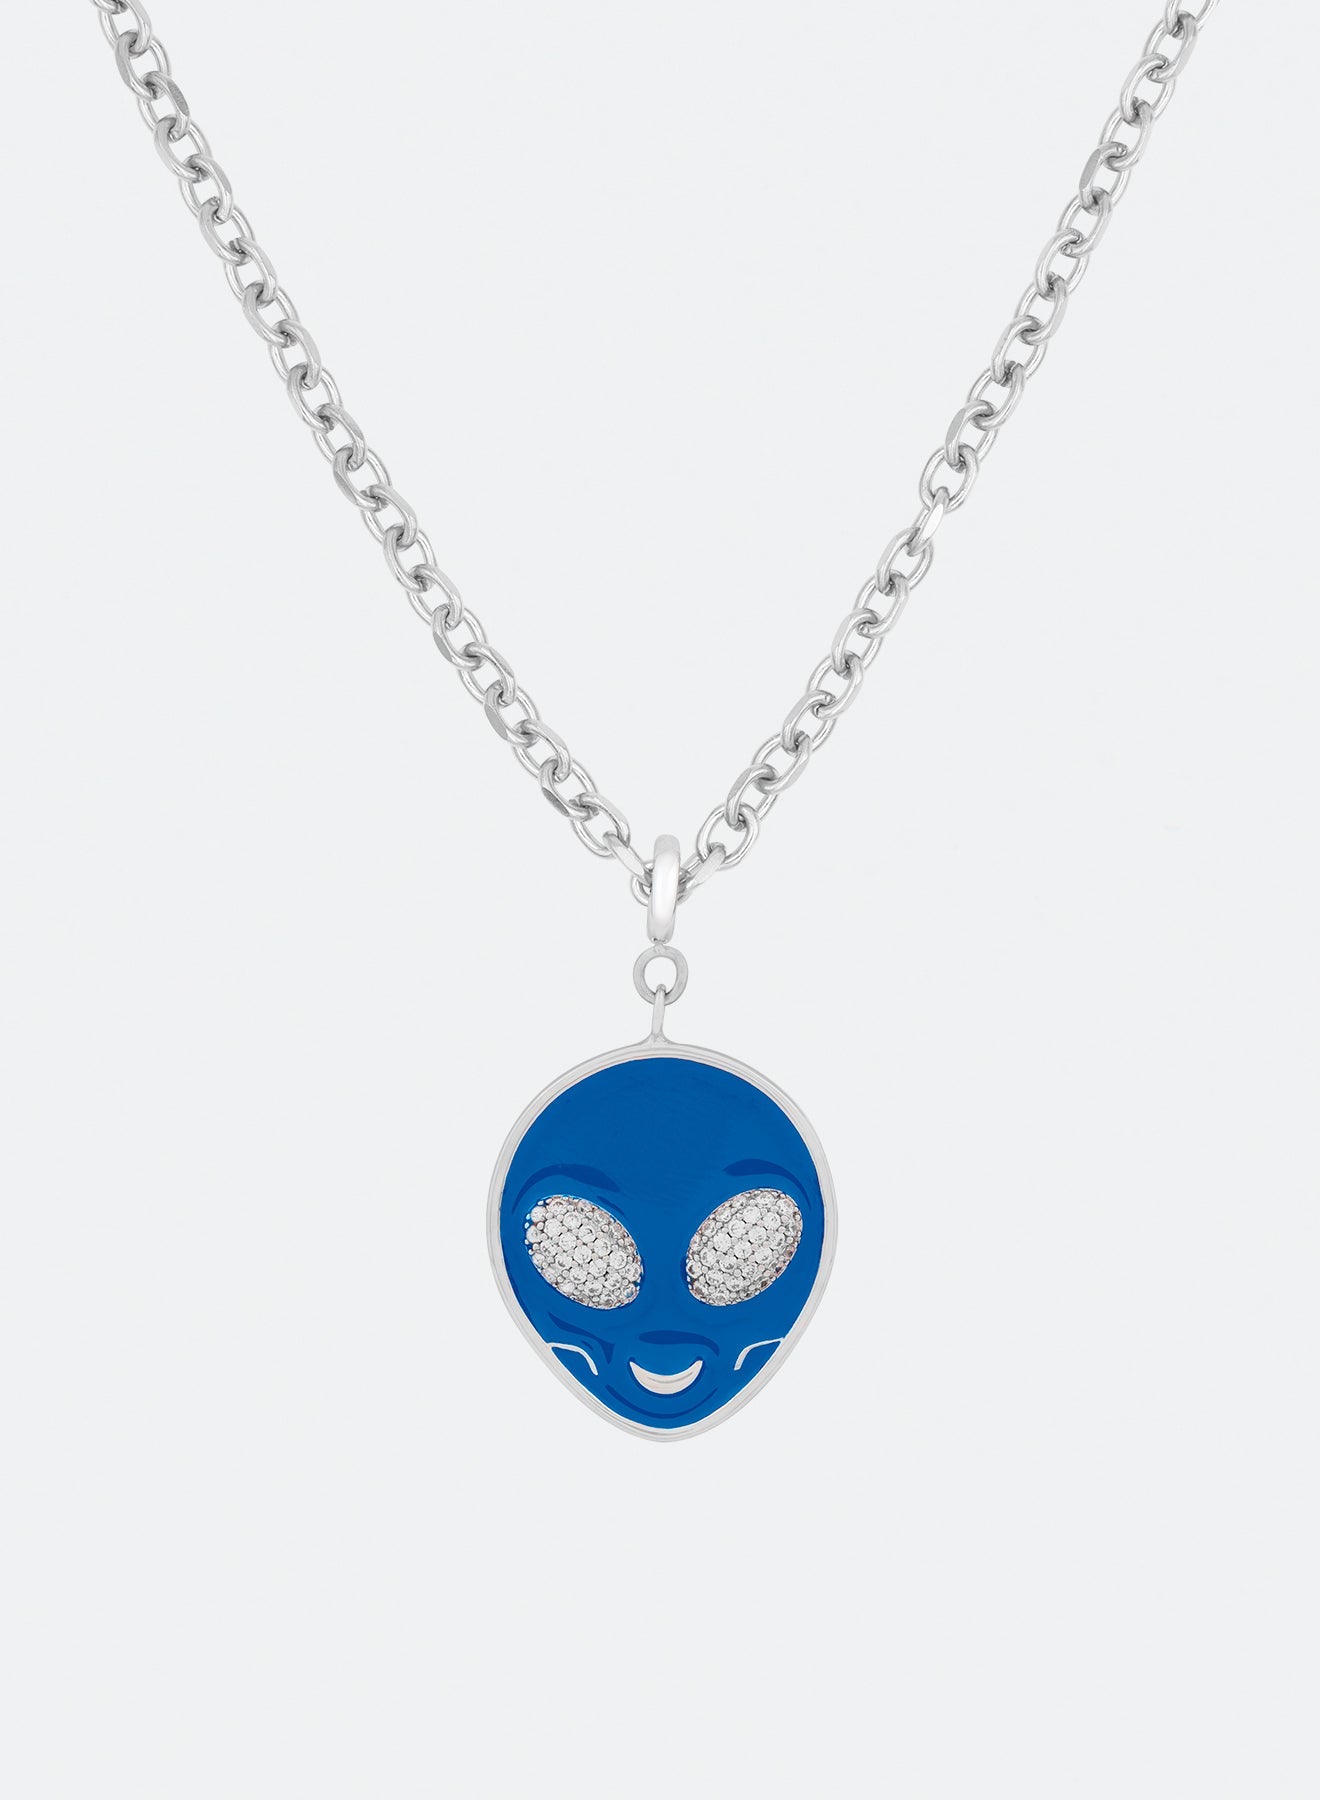 18k white gold coated alien pendant necklace with hand-set micropavé stones in white on blue hand painted glow in the dark alien pendant and 3mm rolo chain